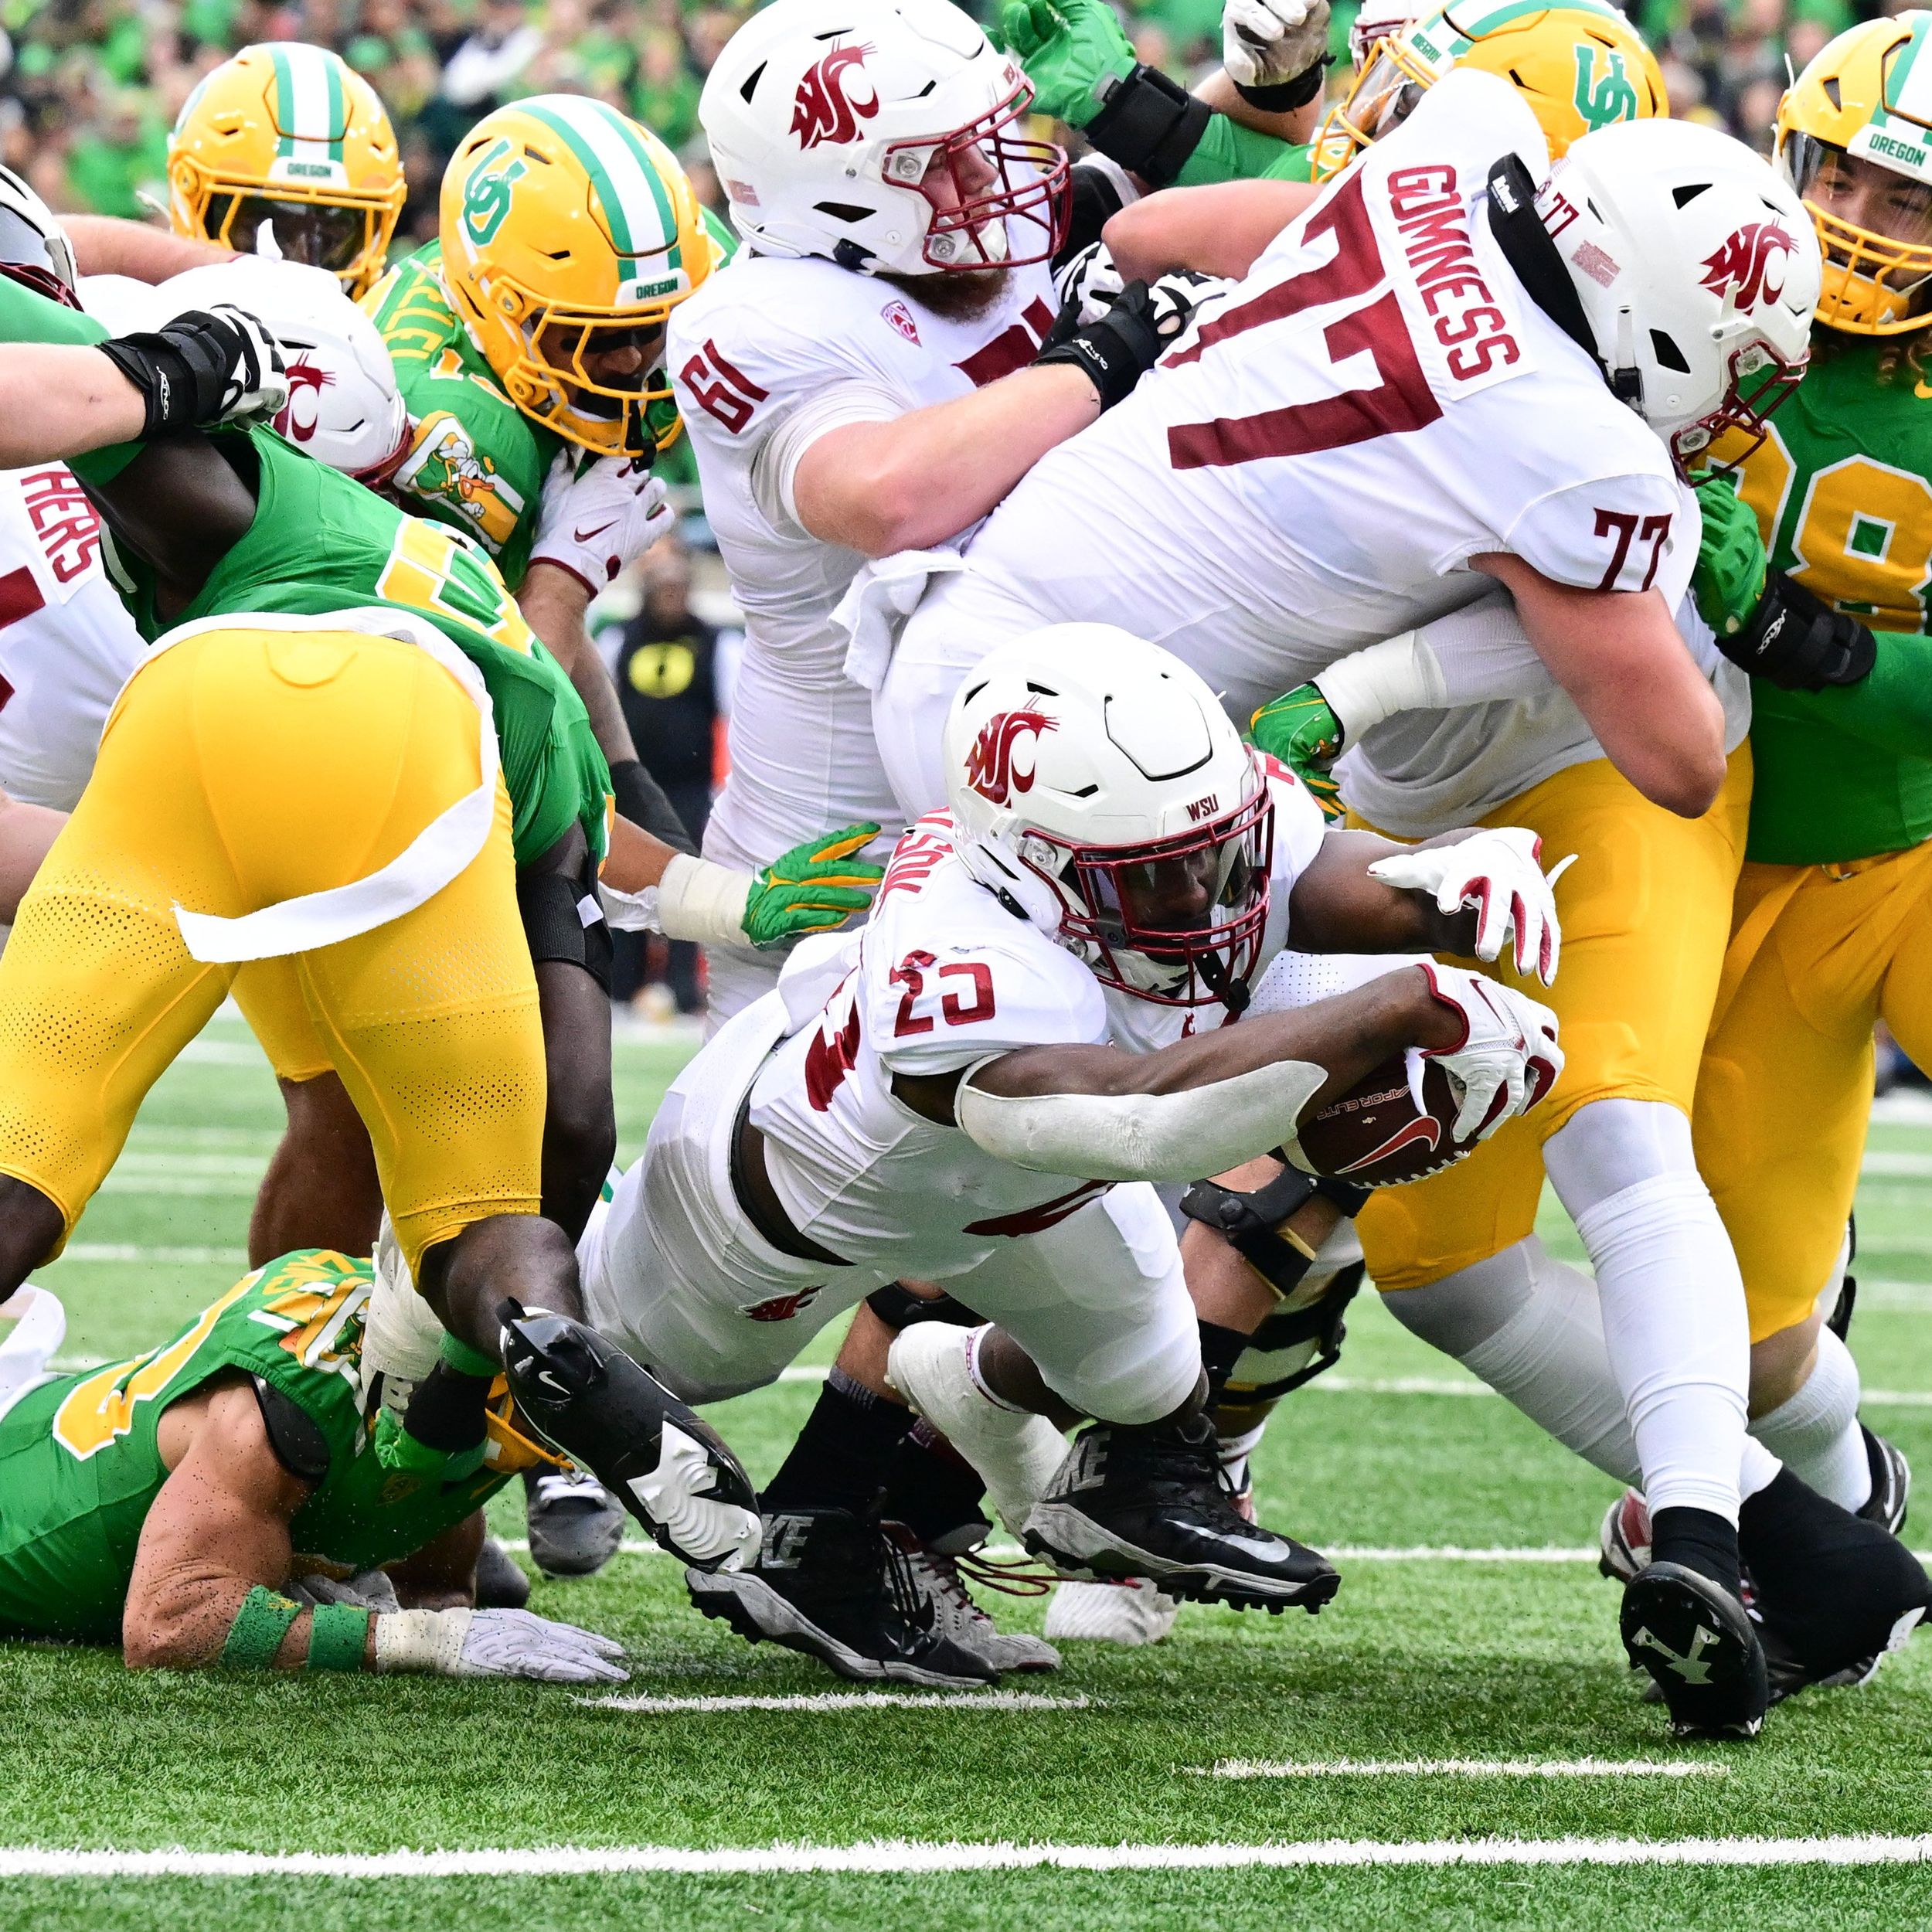 Analysis: WSU got worn down by Oregon, but the Cougs improved in ways that  matter